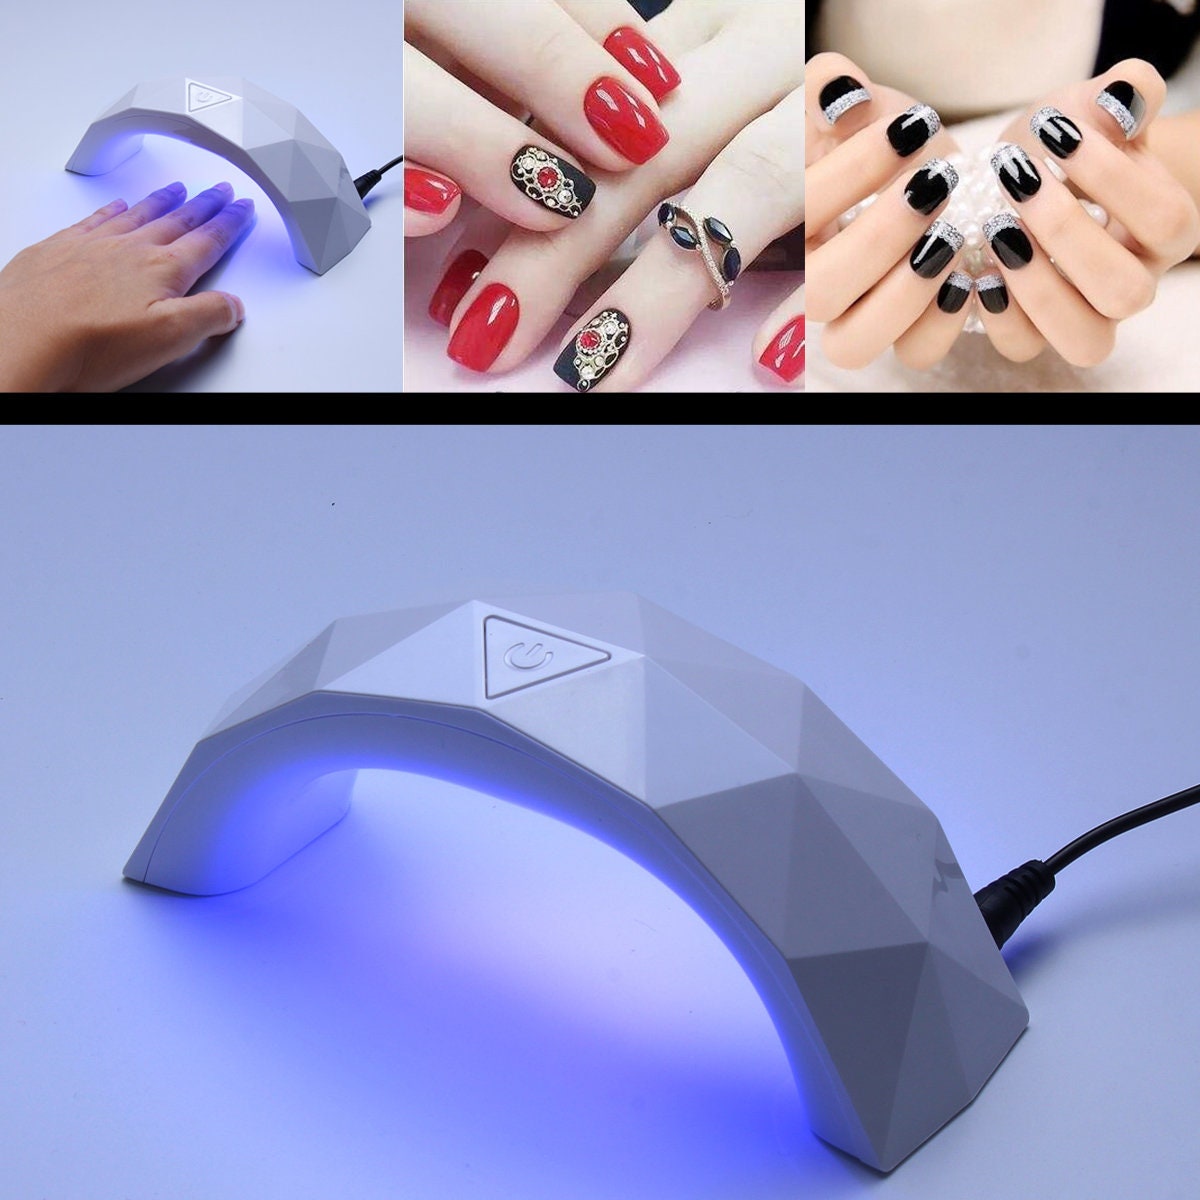  INFILILA Mini UV Light for Gel Nails Portable UV Light for  Nails 180°Opening Design USB Nail Dryer UV LED Nail Lamp Curing All Gels  16W Quick-Drying UV Nail Lamp for